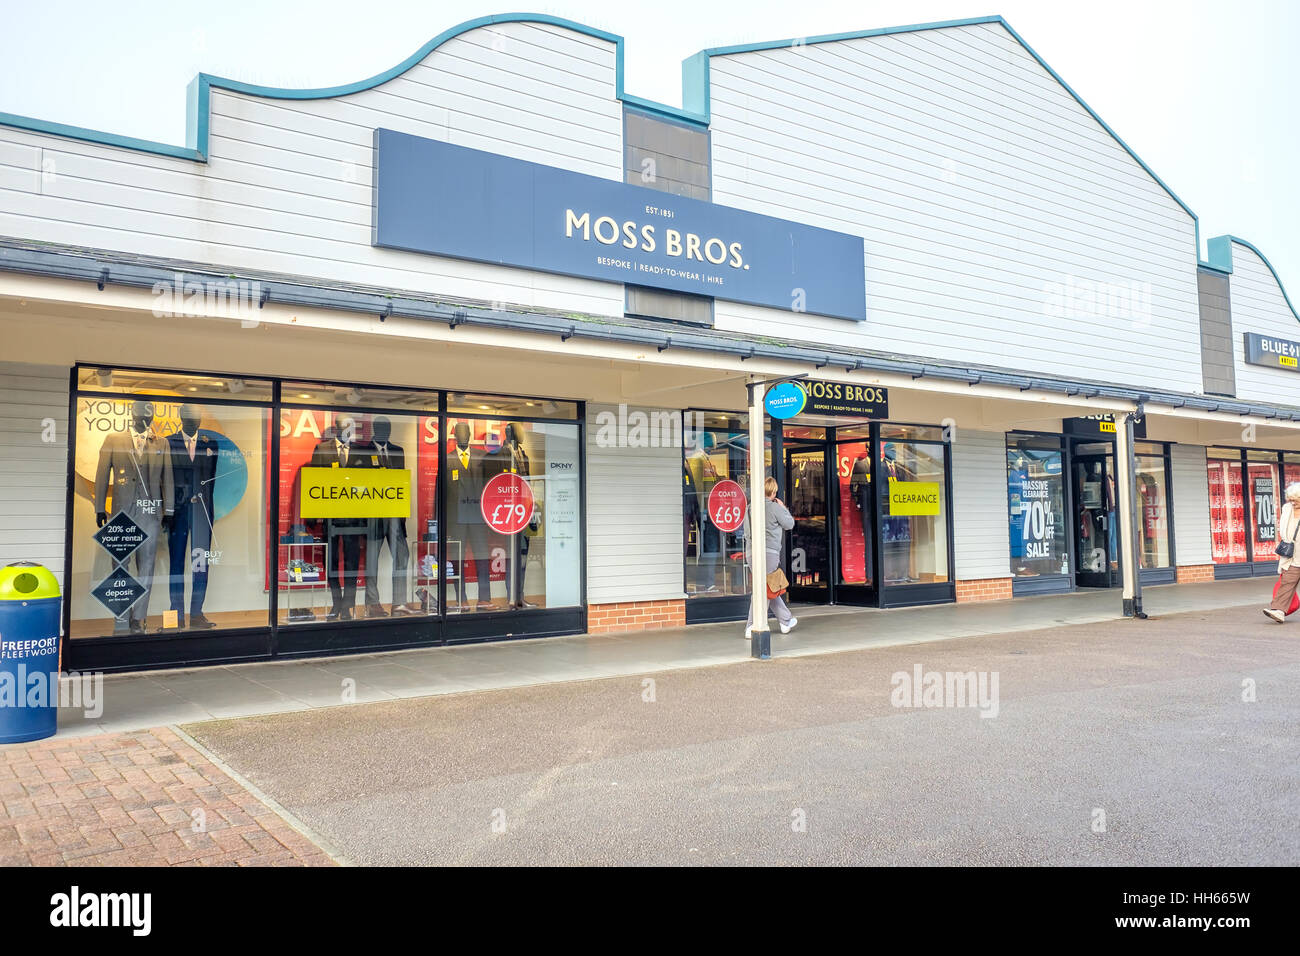 Moss Bros Shop Freeport shopping Outlet 